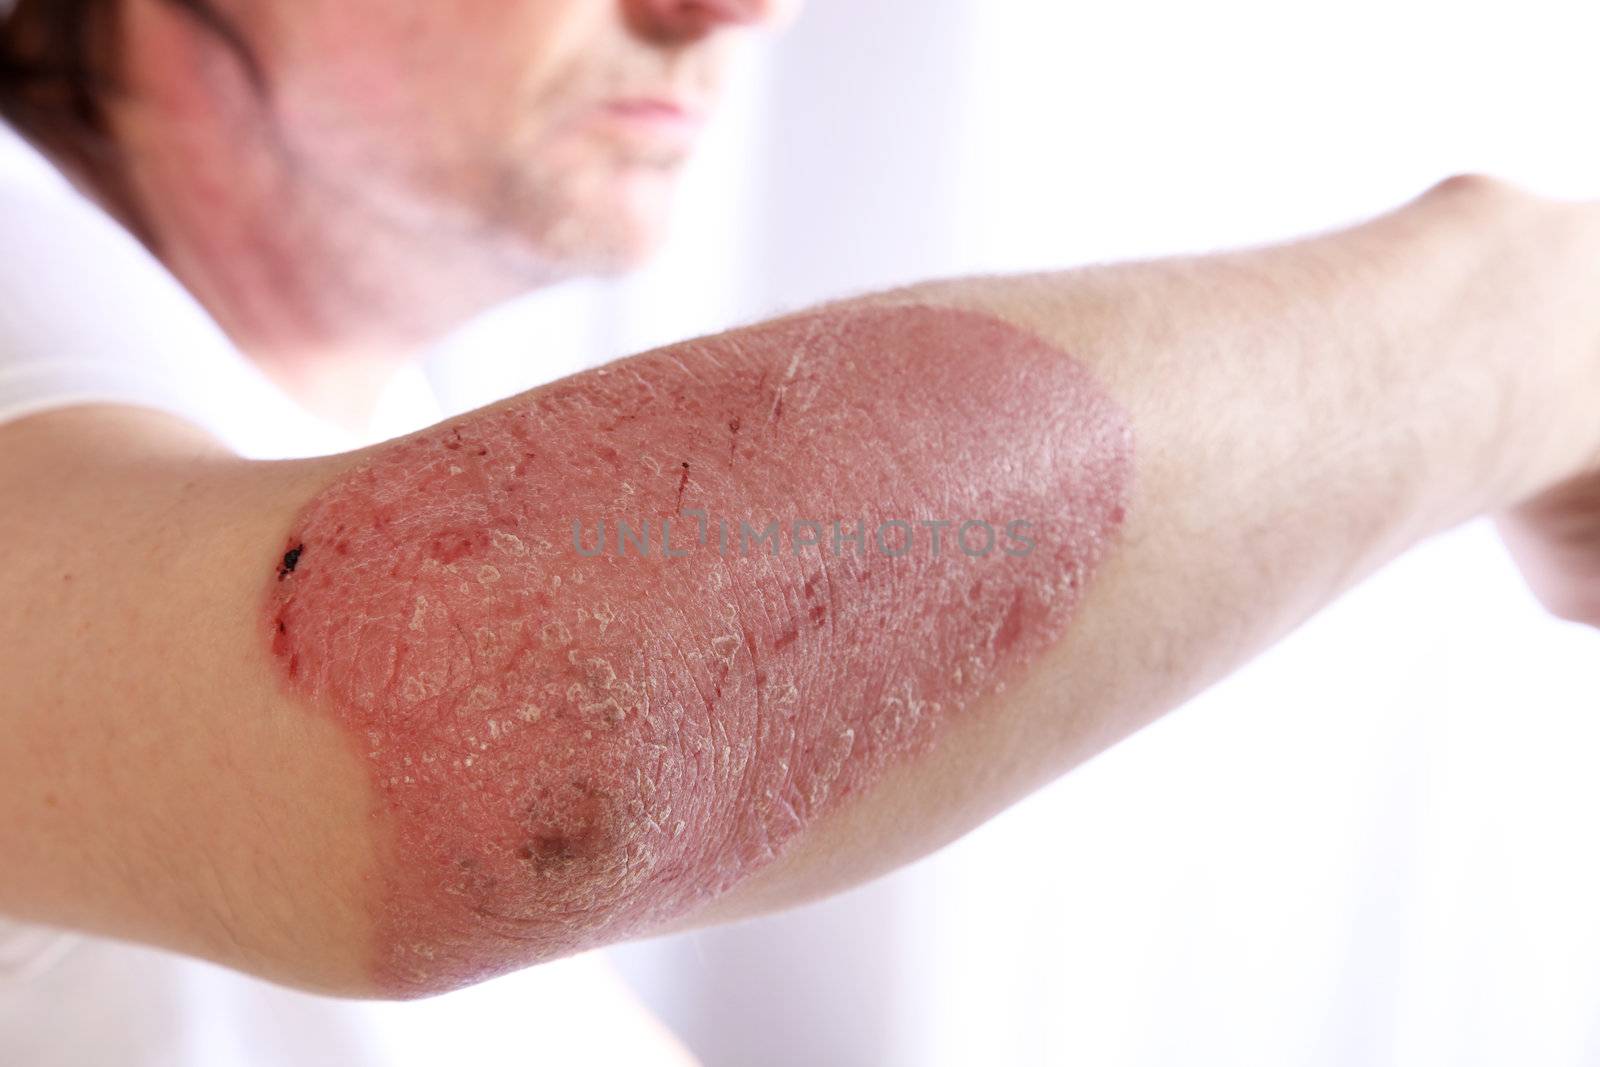 Person with plaque psoriasis of the arm causing an inflamed red patch of skin covered in silvery scales to extend from the elbow, a chronic lifelong disease that is incurable but non-contagious